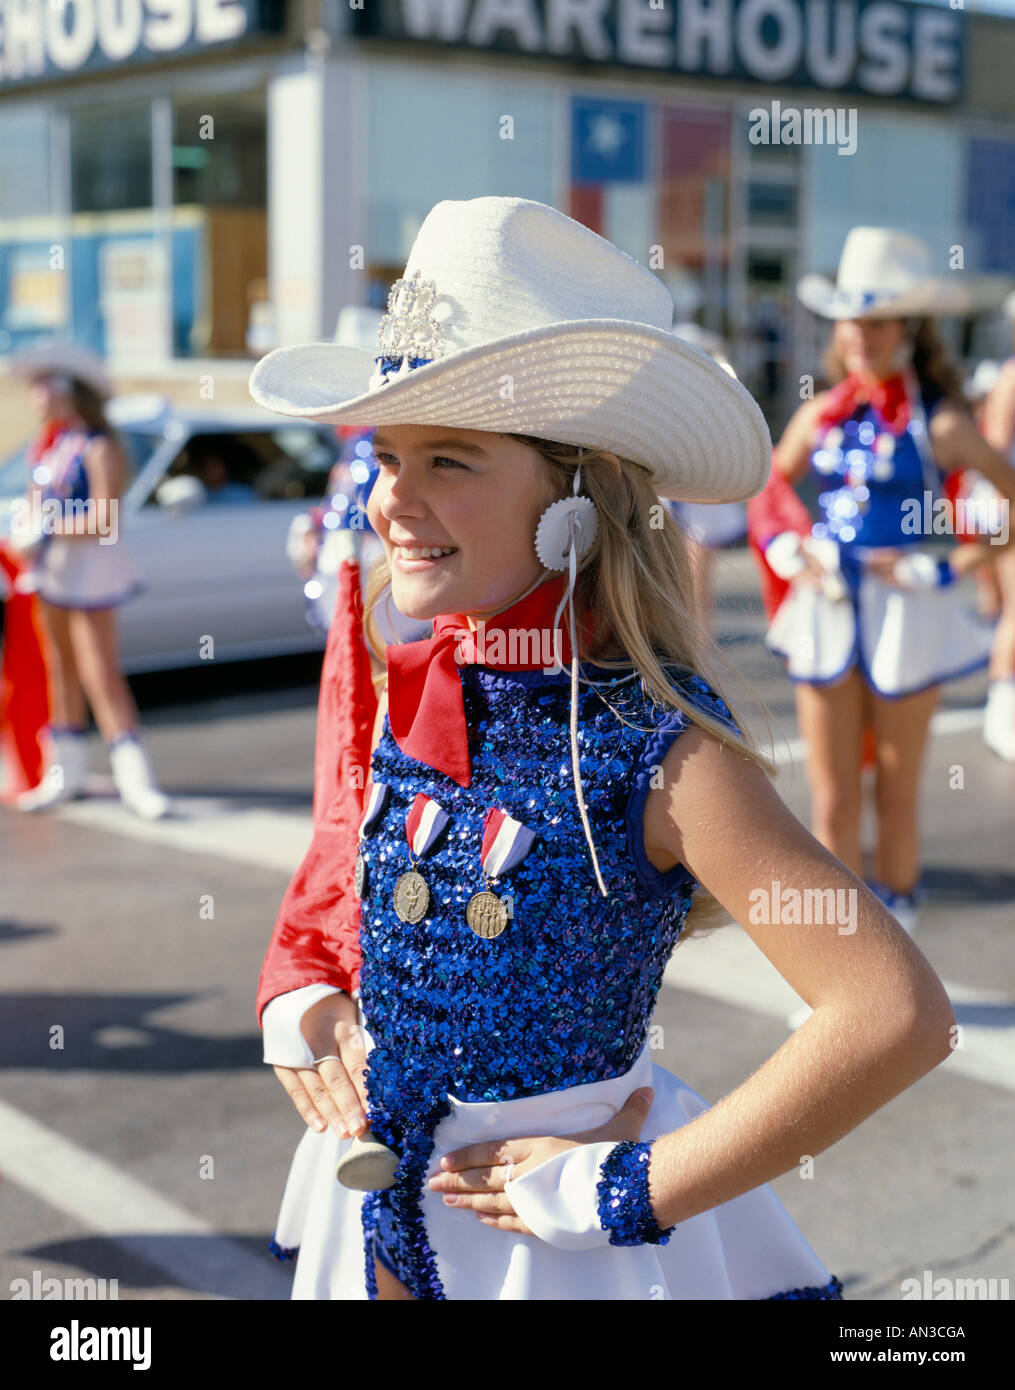 Texas State Fair Parade / Street Parade / Girl Dressed in American Costume,  Dallas, Texas, USA Stock Photo - Alamy